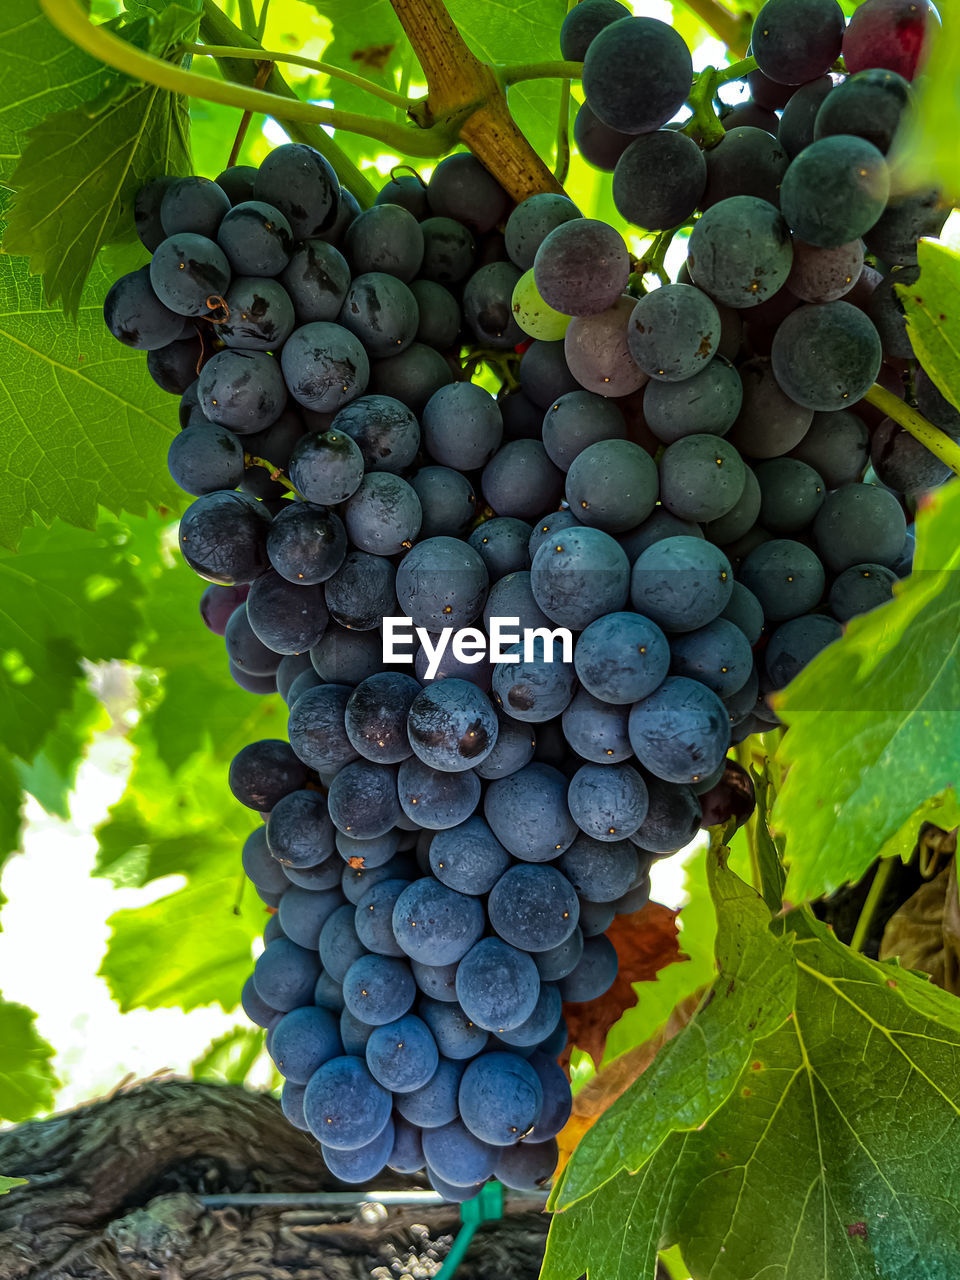 food and drink, grape, food, fruit, healthy eating, vineyard, plant, agriculture, leaf, plant part, growth, vine, freshness, nature, bunch, crop, produce, winemaking, no people, wellbeing, green, close-up, abundance, landscape, tree, rural scene, outdoors, day, field, ripe, grape leaves, beauty in nature, farm, cultivated, land, red grape, juicy, alcohol